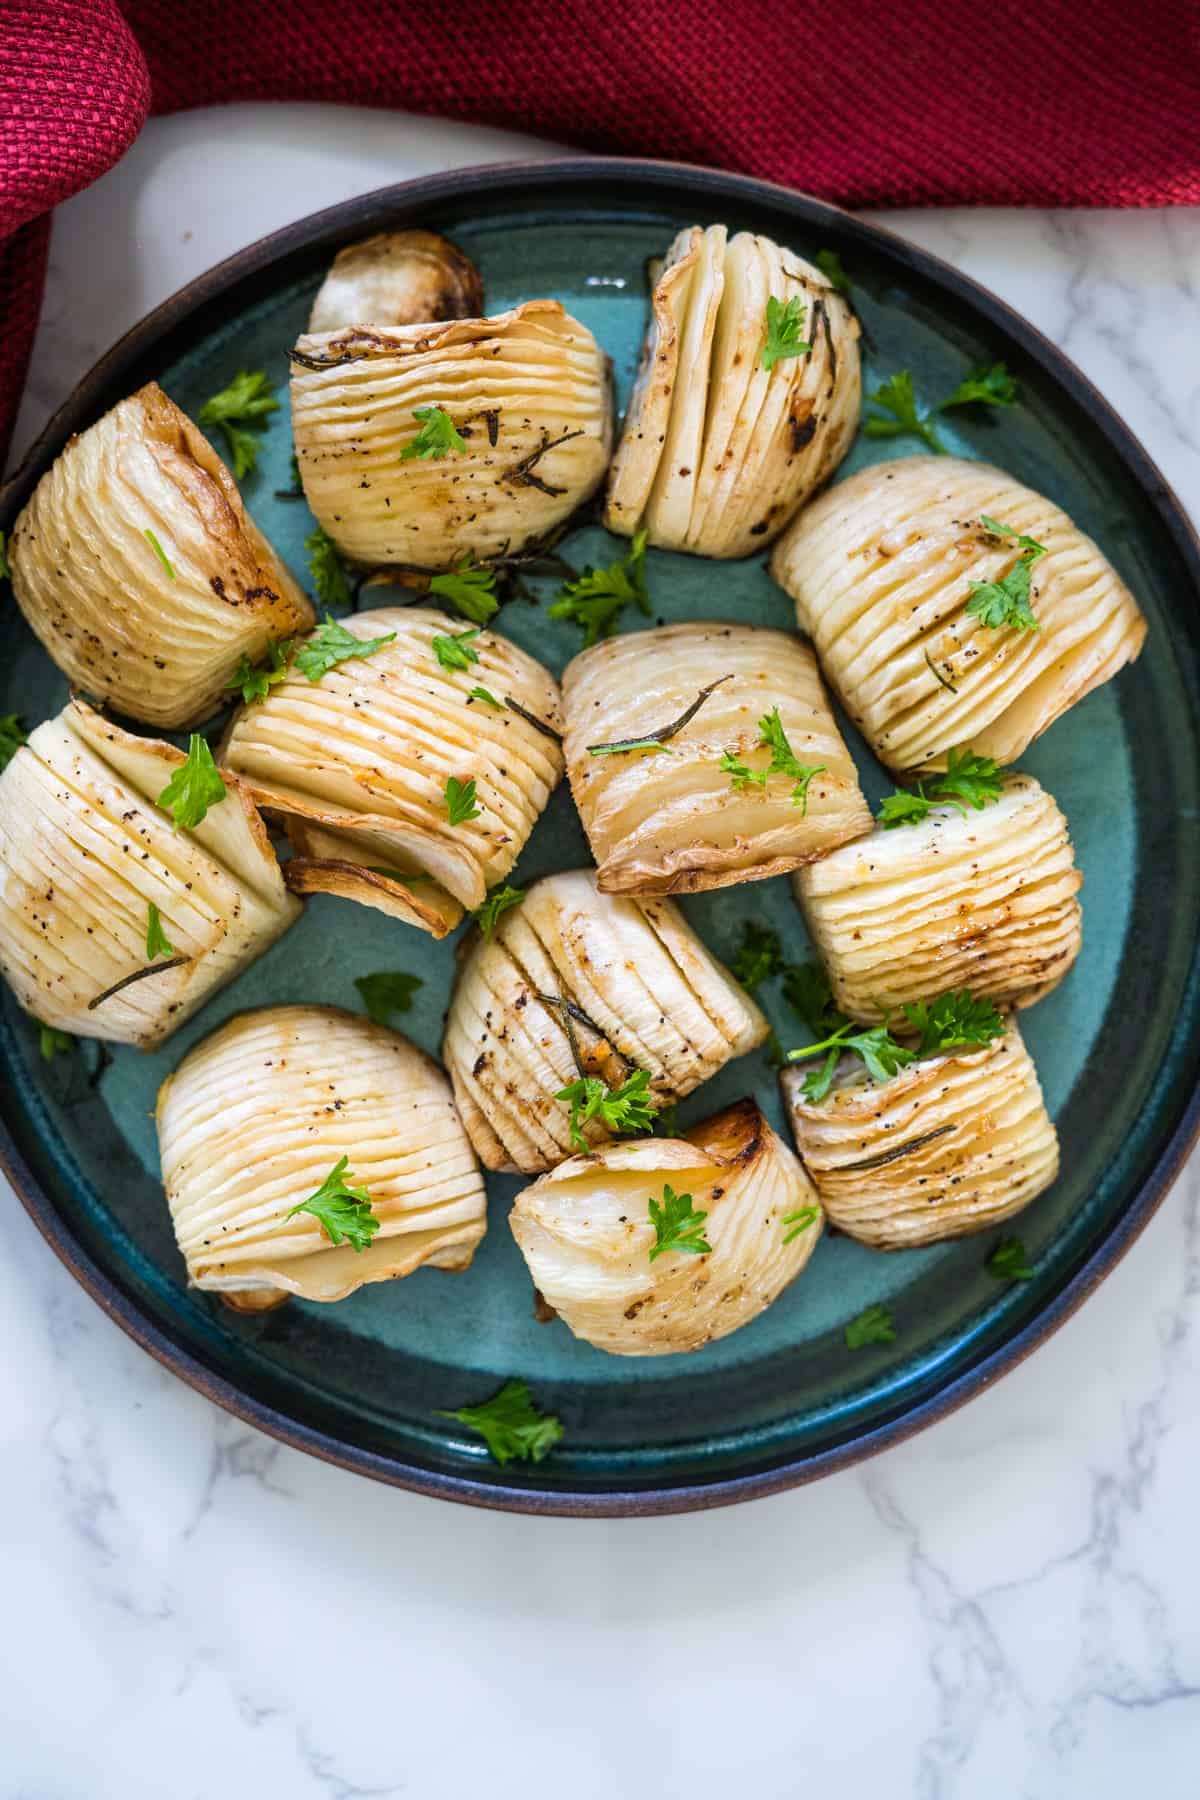 Roasted artichokes on a plate with parsley, perfect for a keto-friendly side dish.